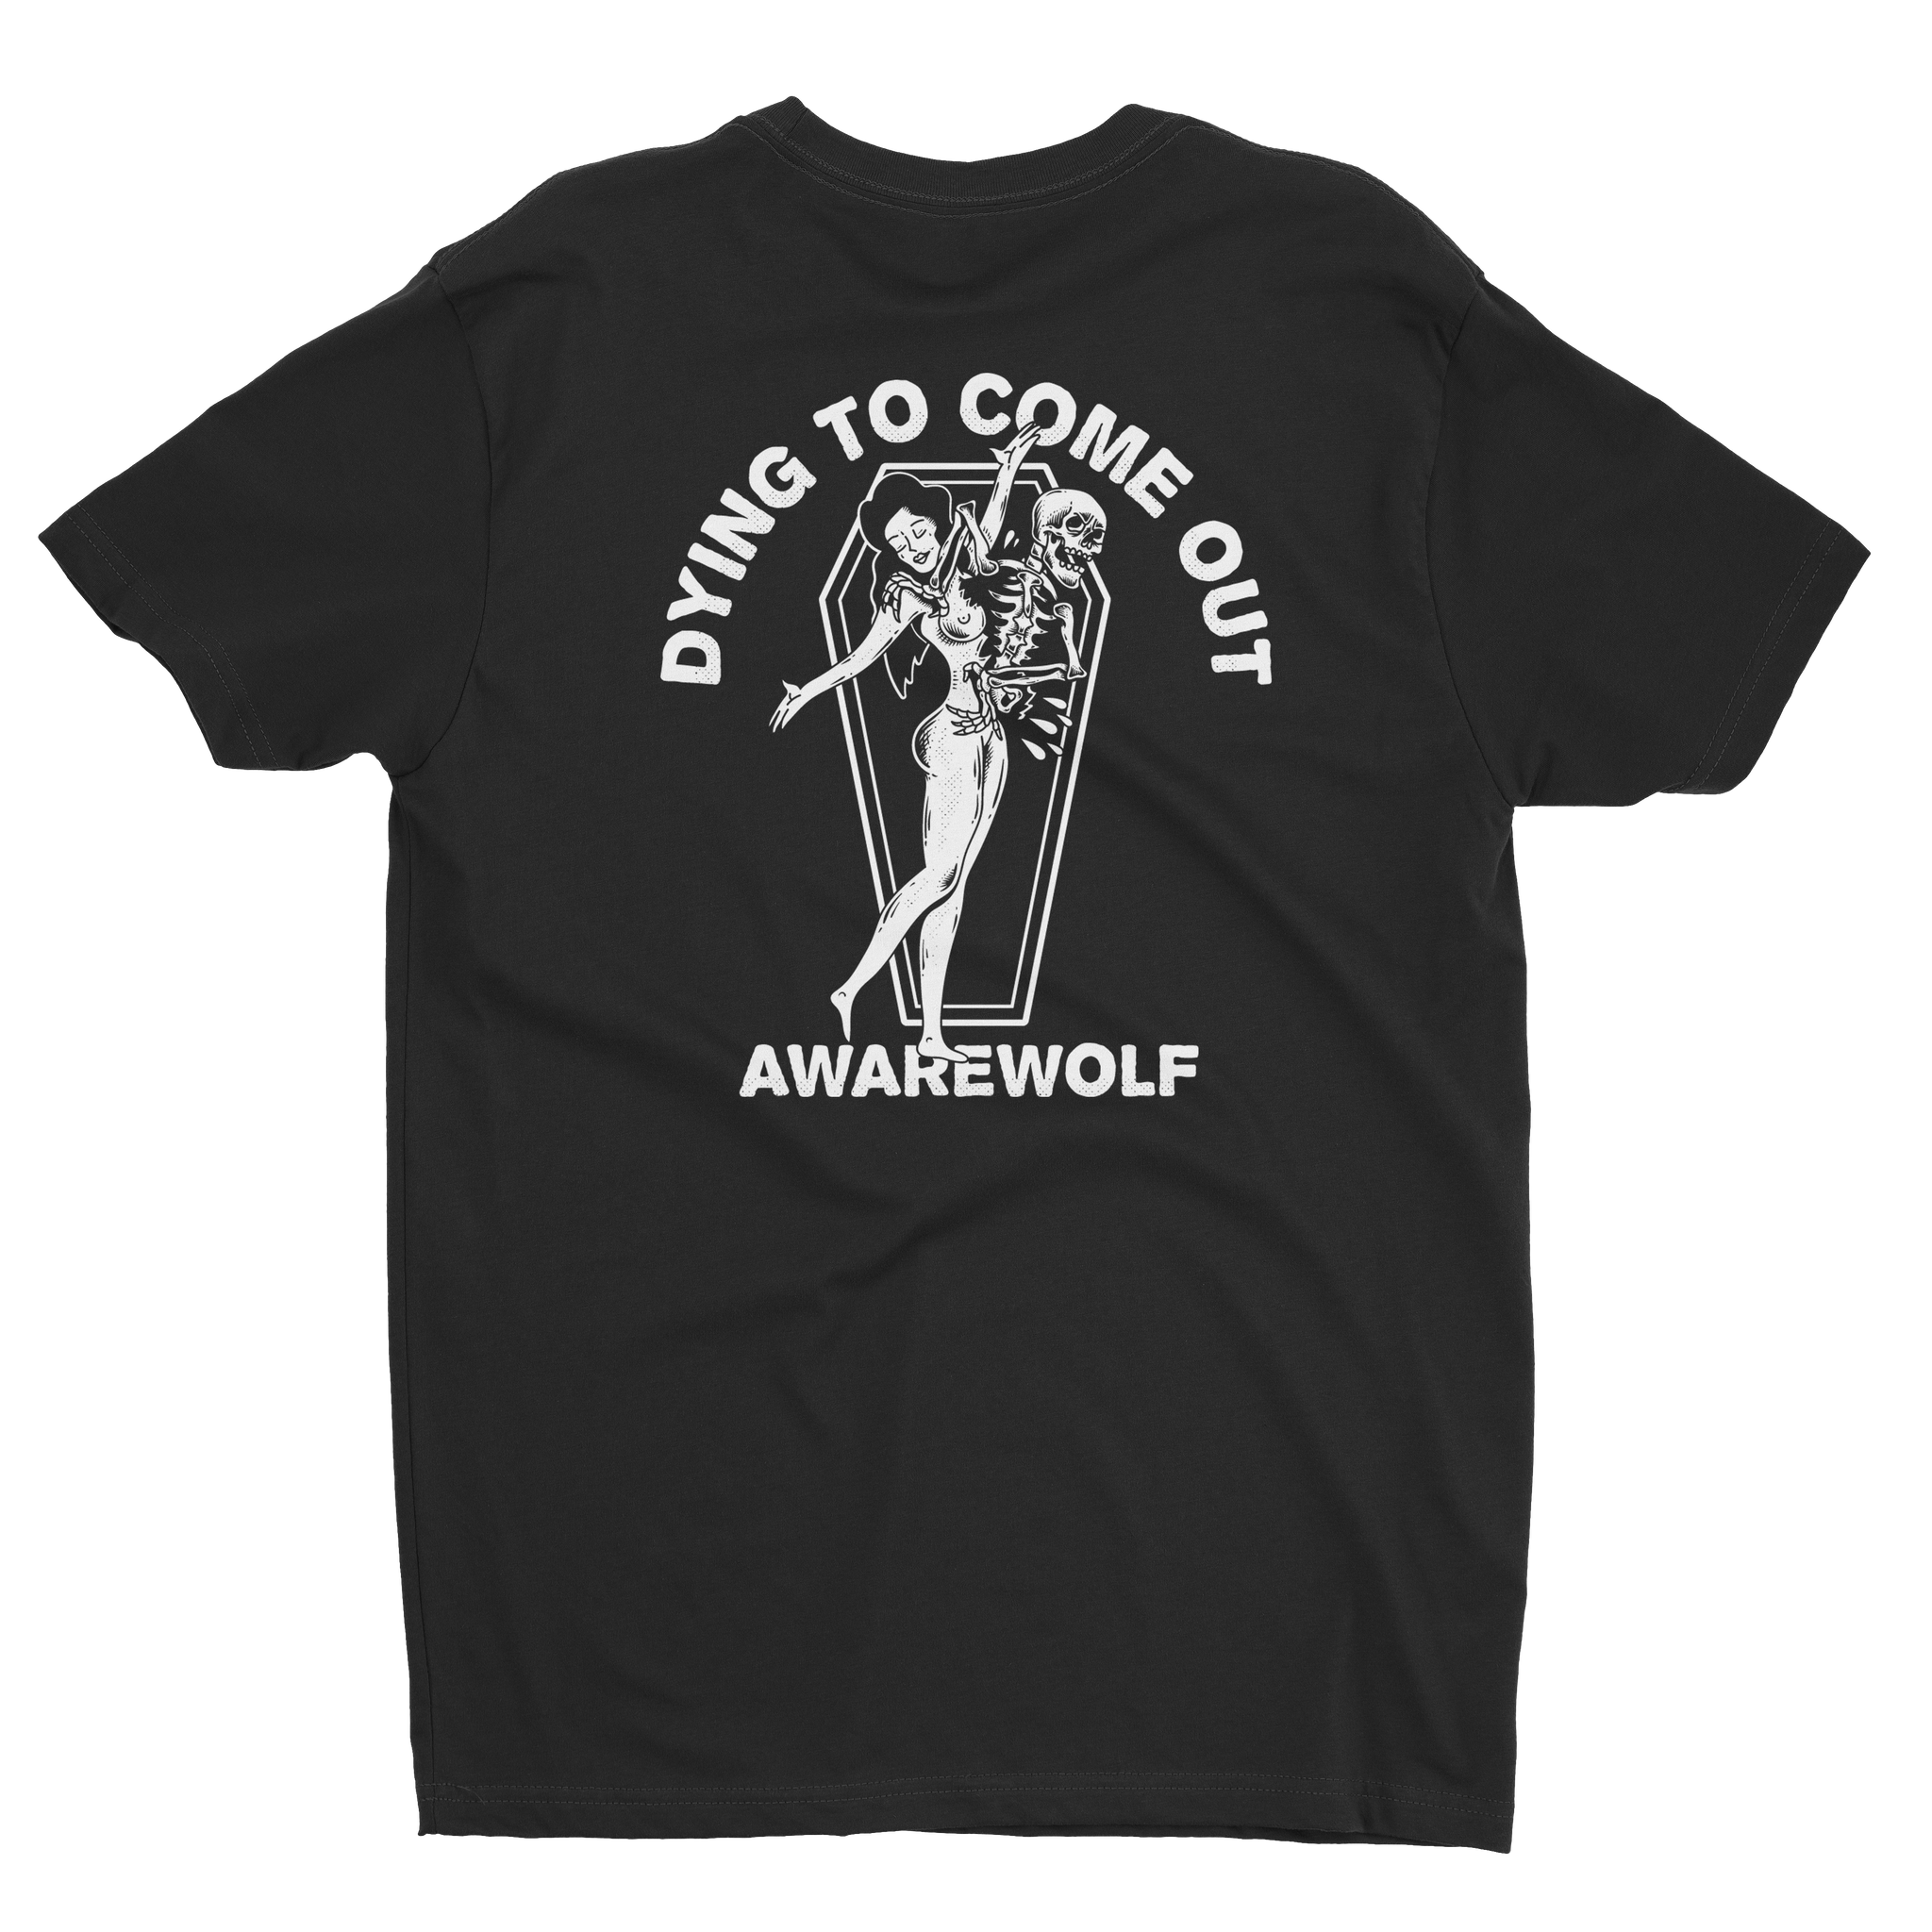 Dying To Come Out - Awarewolf Apparel